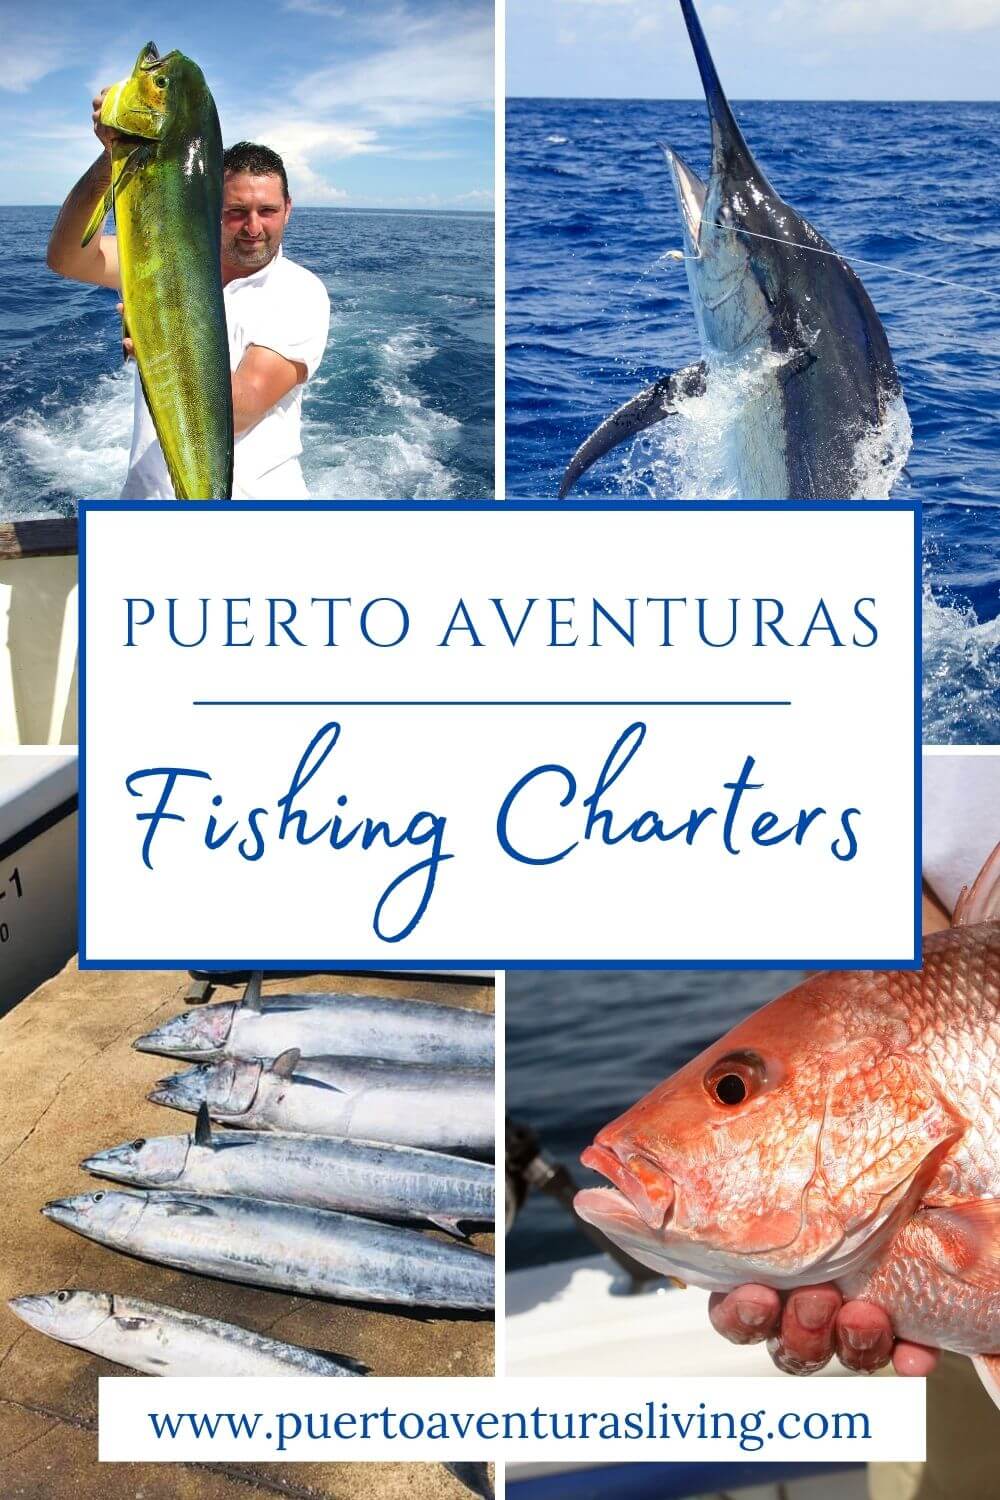 Different fish being caught on boats from Puerto Aventuras